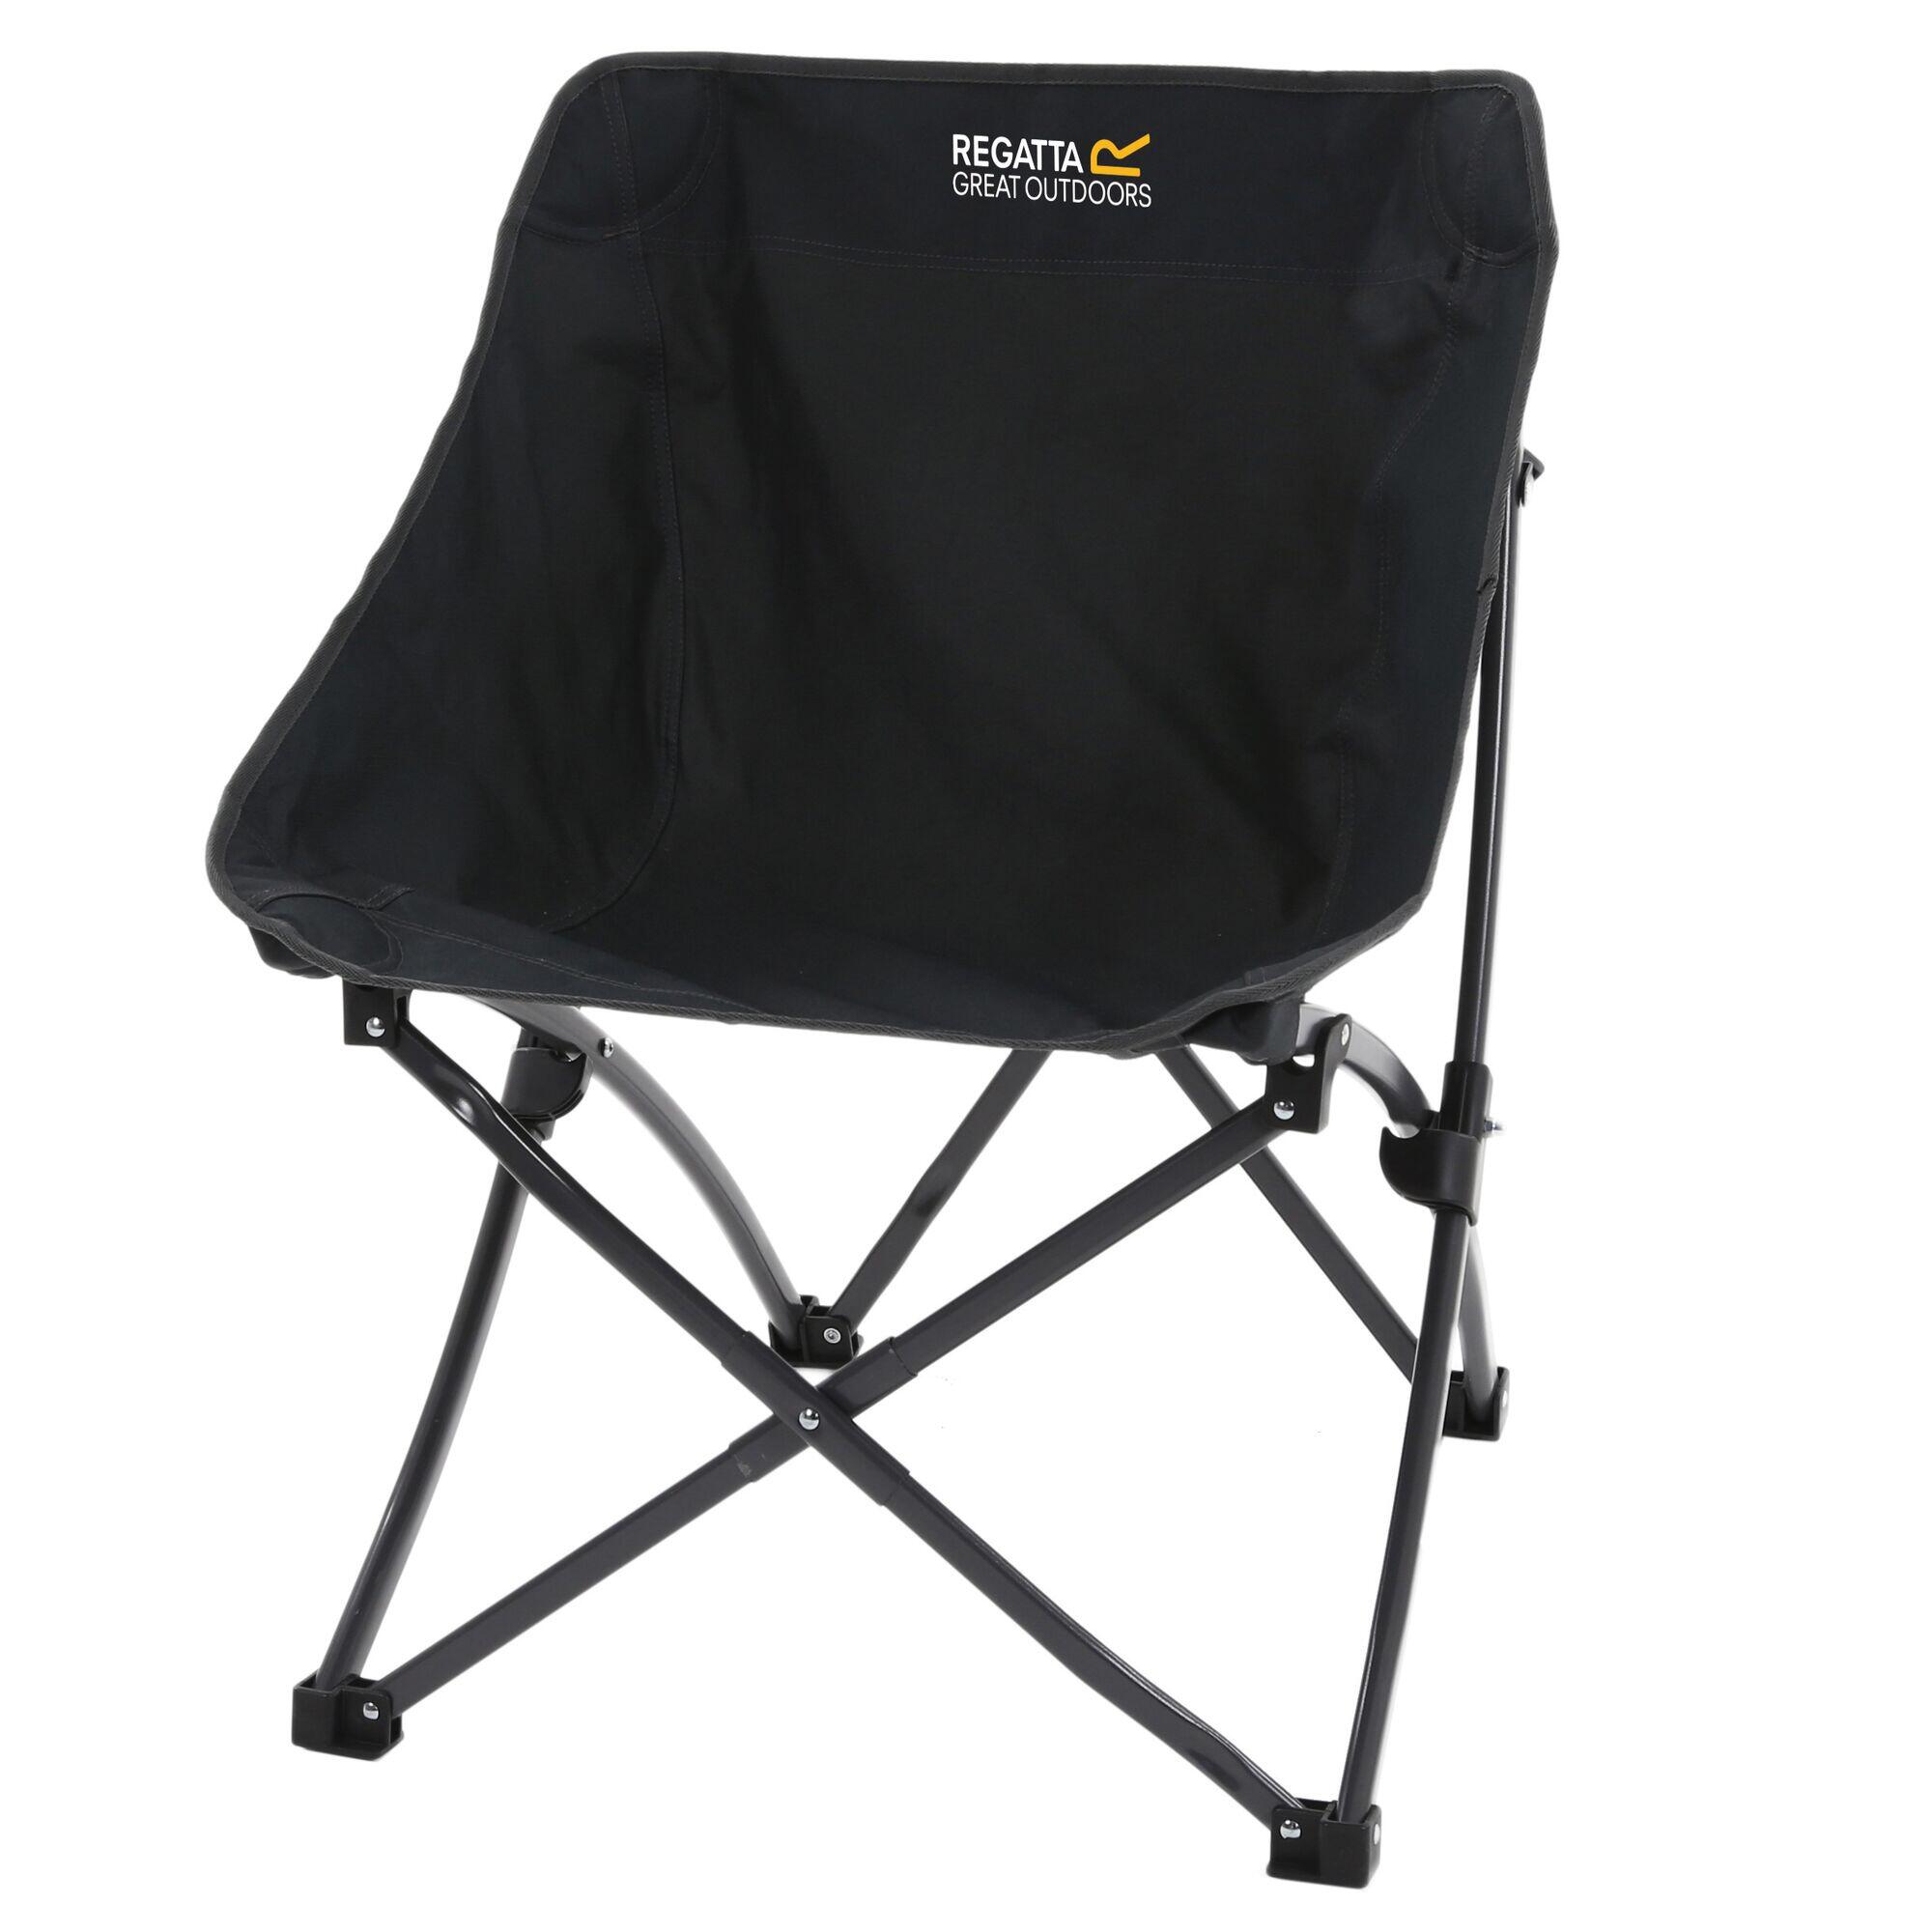 Forza Pro Adults' Camping Chair - Black 1/2